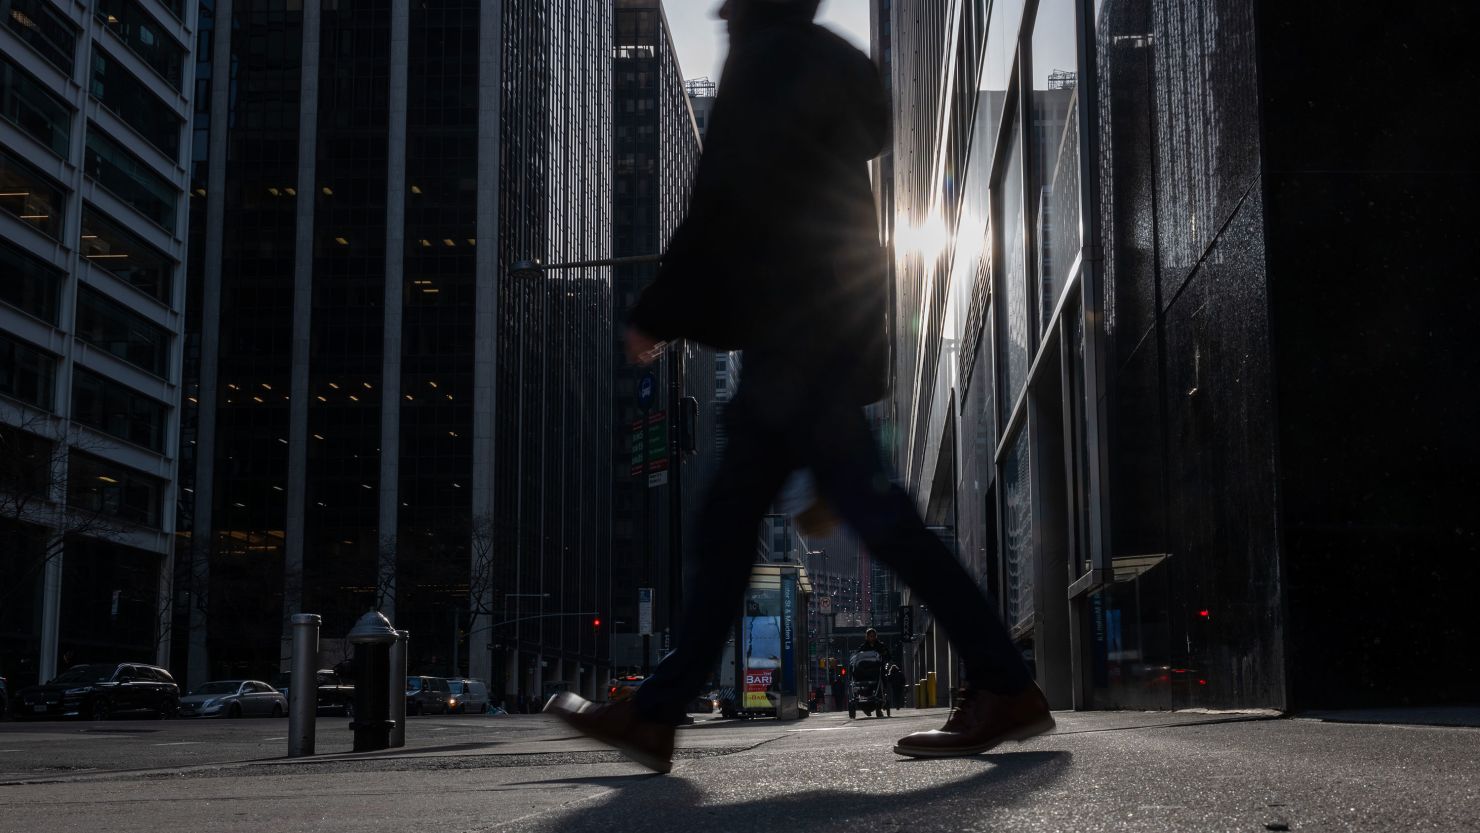 The sun beats down on New York City streets on a warm day. Scientists say retroreflective material could help keep urban areas significantly cooler in the summer.